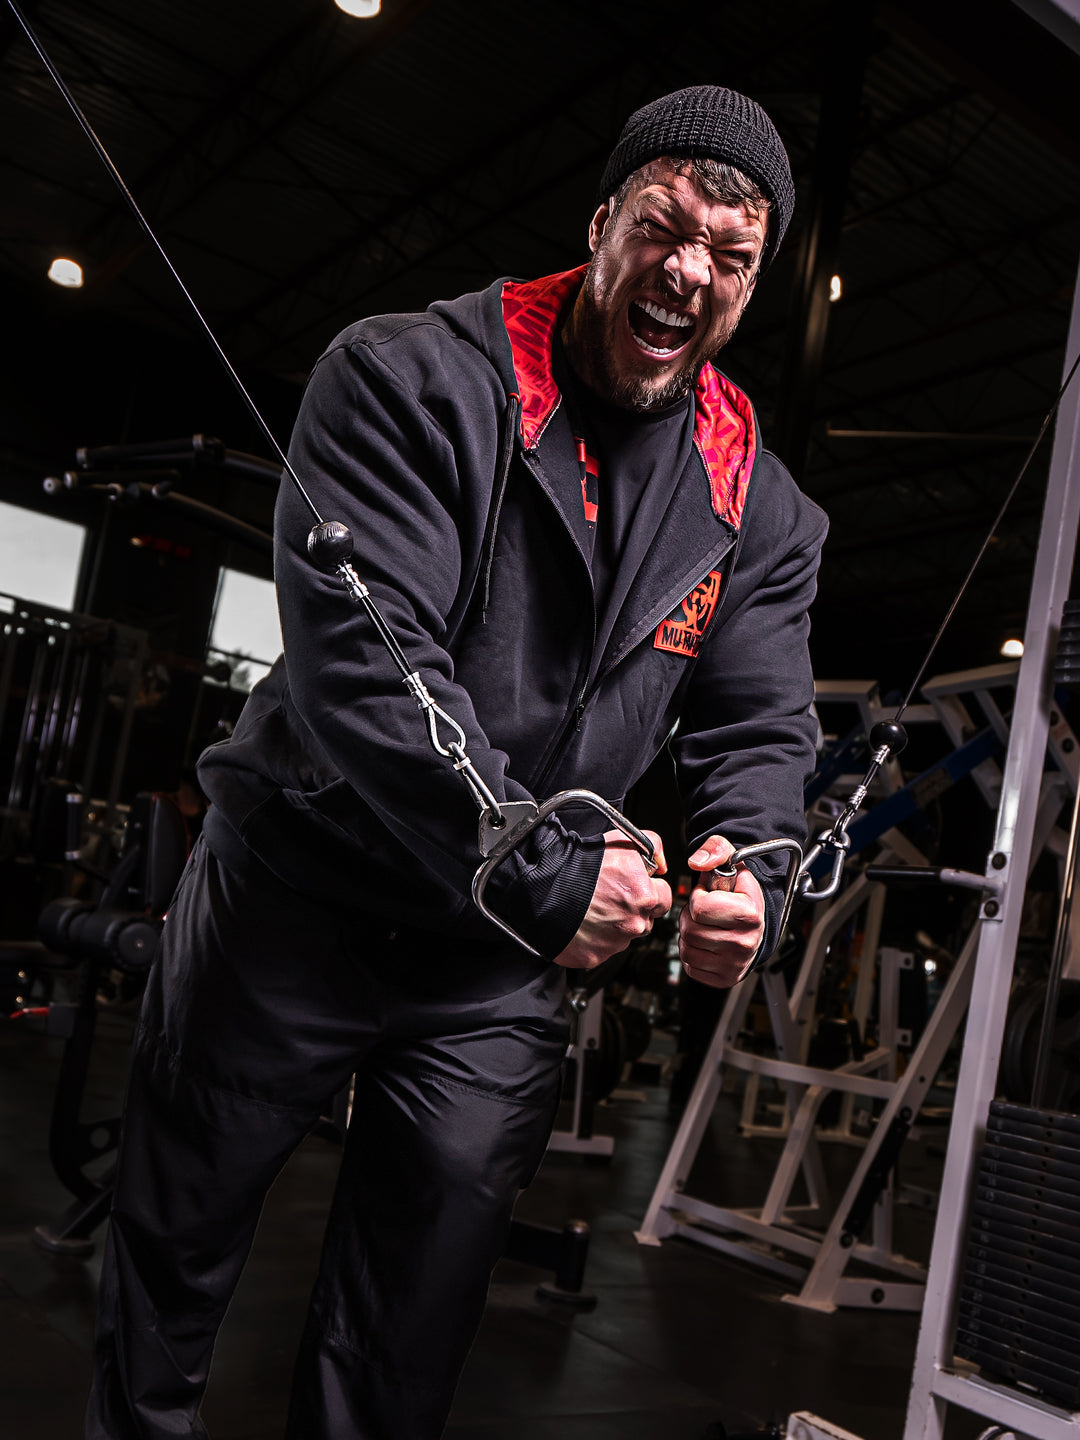 Mutant athlete Jamie Christian is training in the gym wearing Black Mutant Patched Zip-Up Gym Hoodie with a red and black Mutant logo patch on left chest. Two pockets and red hood lining with red watermarked Mutant logo.